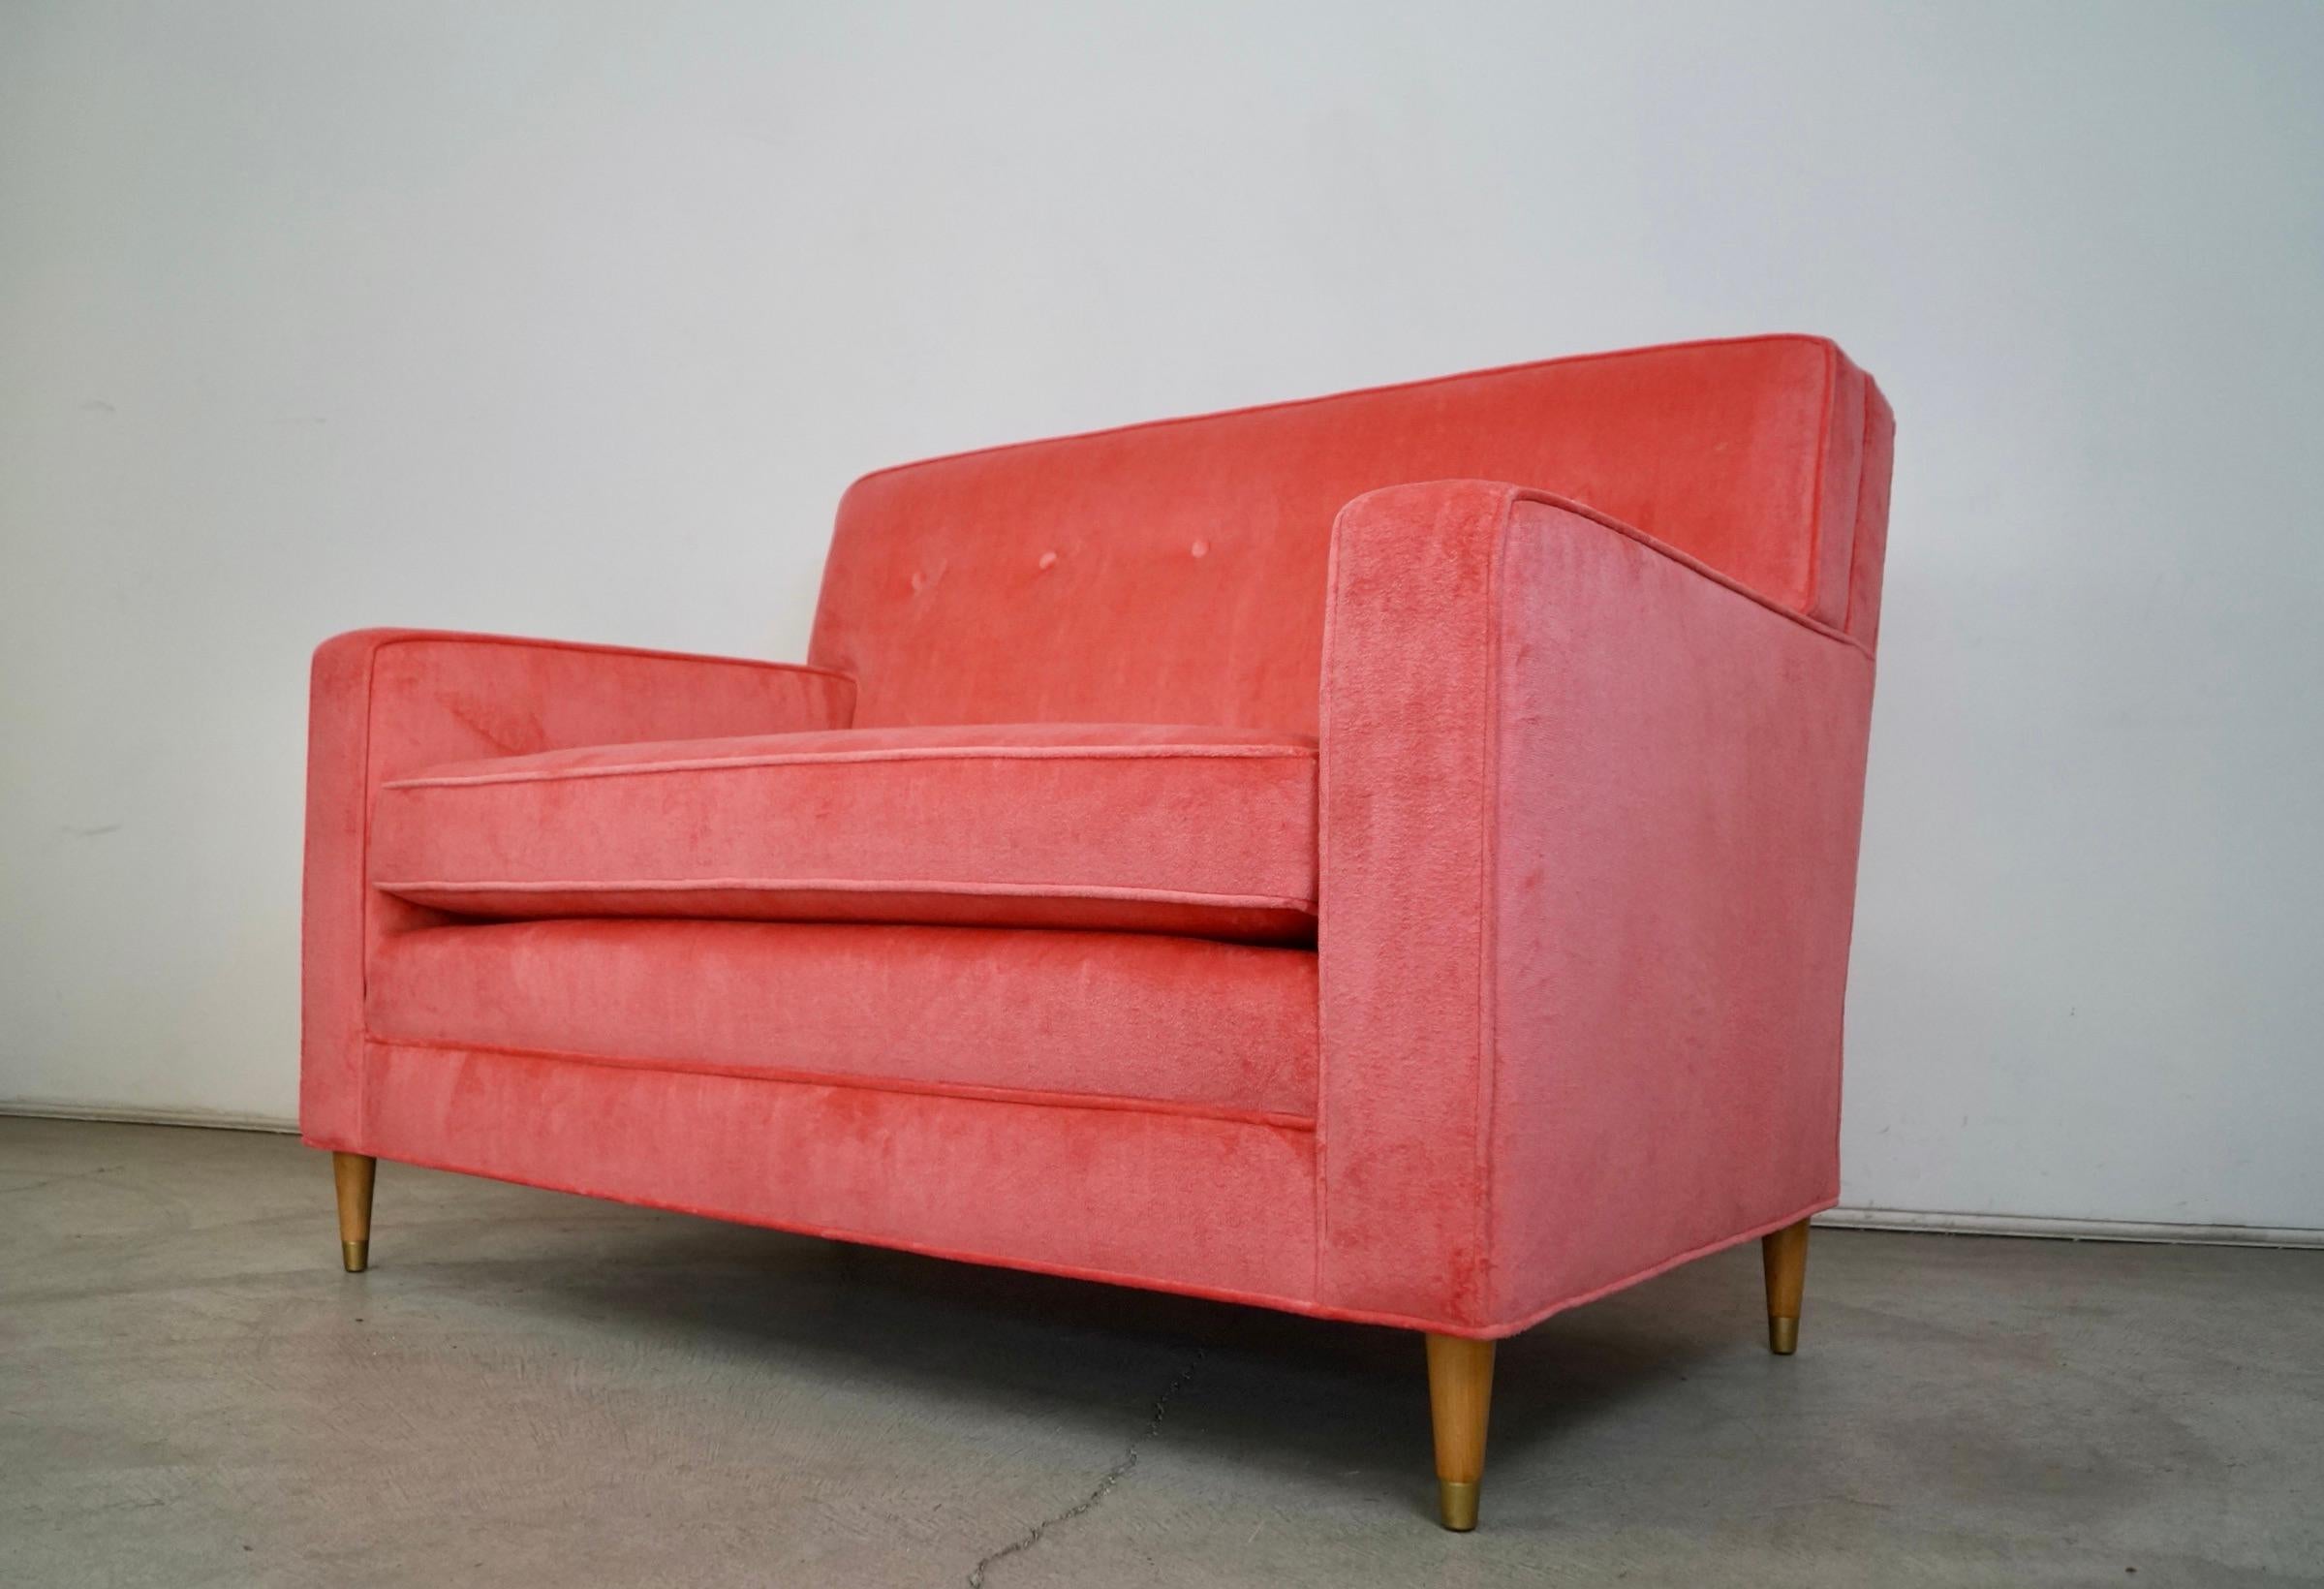 1950's Mid-Century Modern Loveseat Sofa Reupholstered in Pink Velvet In Excellent Condition For Sale In Burbank, CA